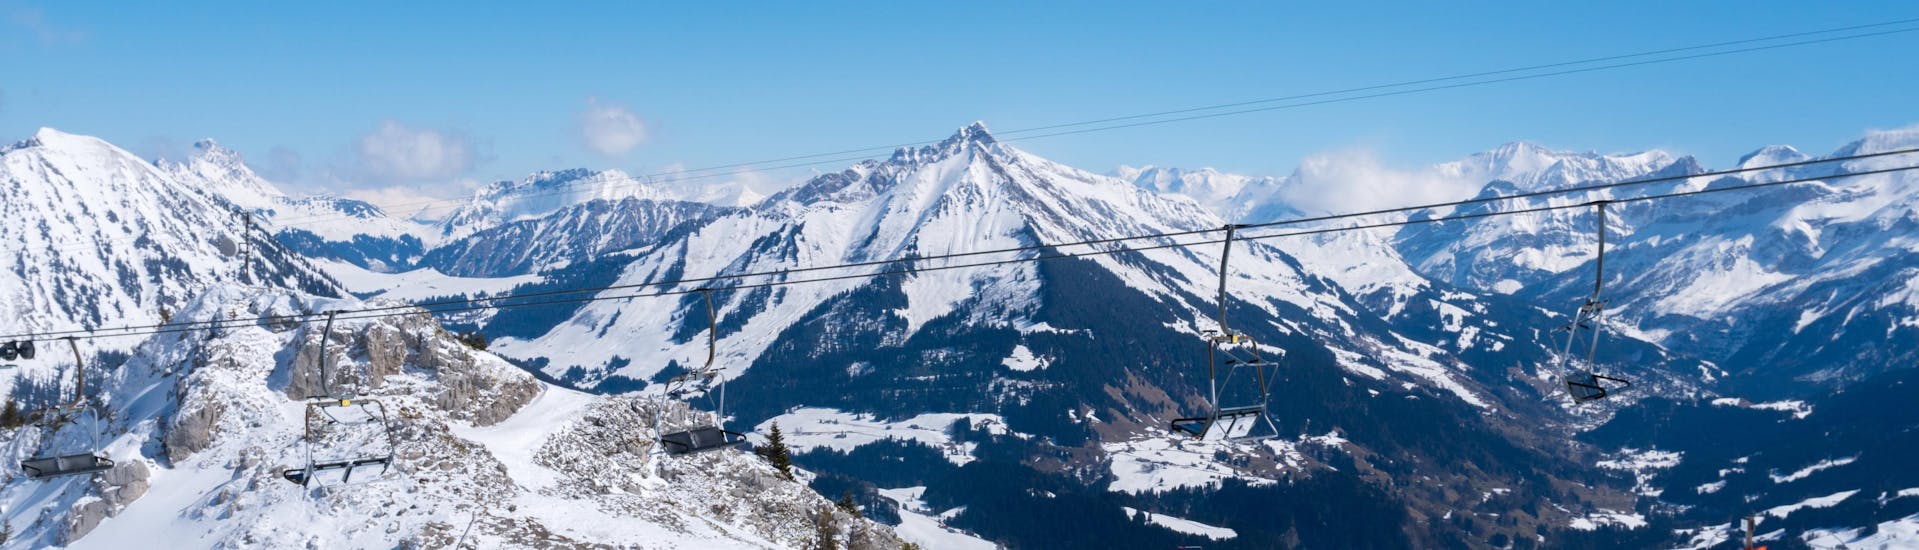 An image of several skiers riding down one of the ski slopes in the Swiss ski resort of Leysin, a popular destination for aspiring skiers who wish to learn to ski by taking ski lessons with one of the local ski schools.